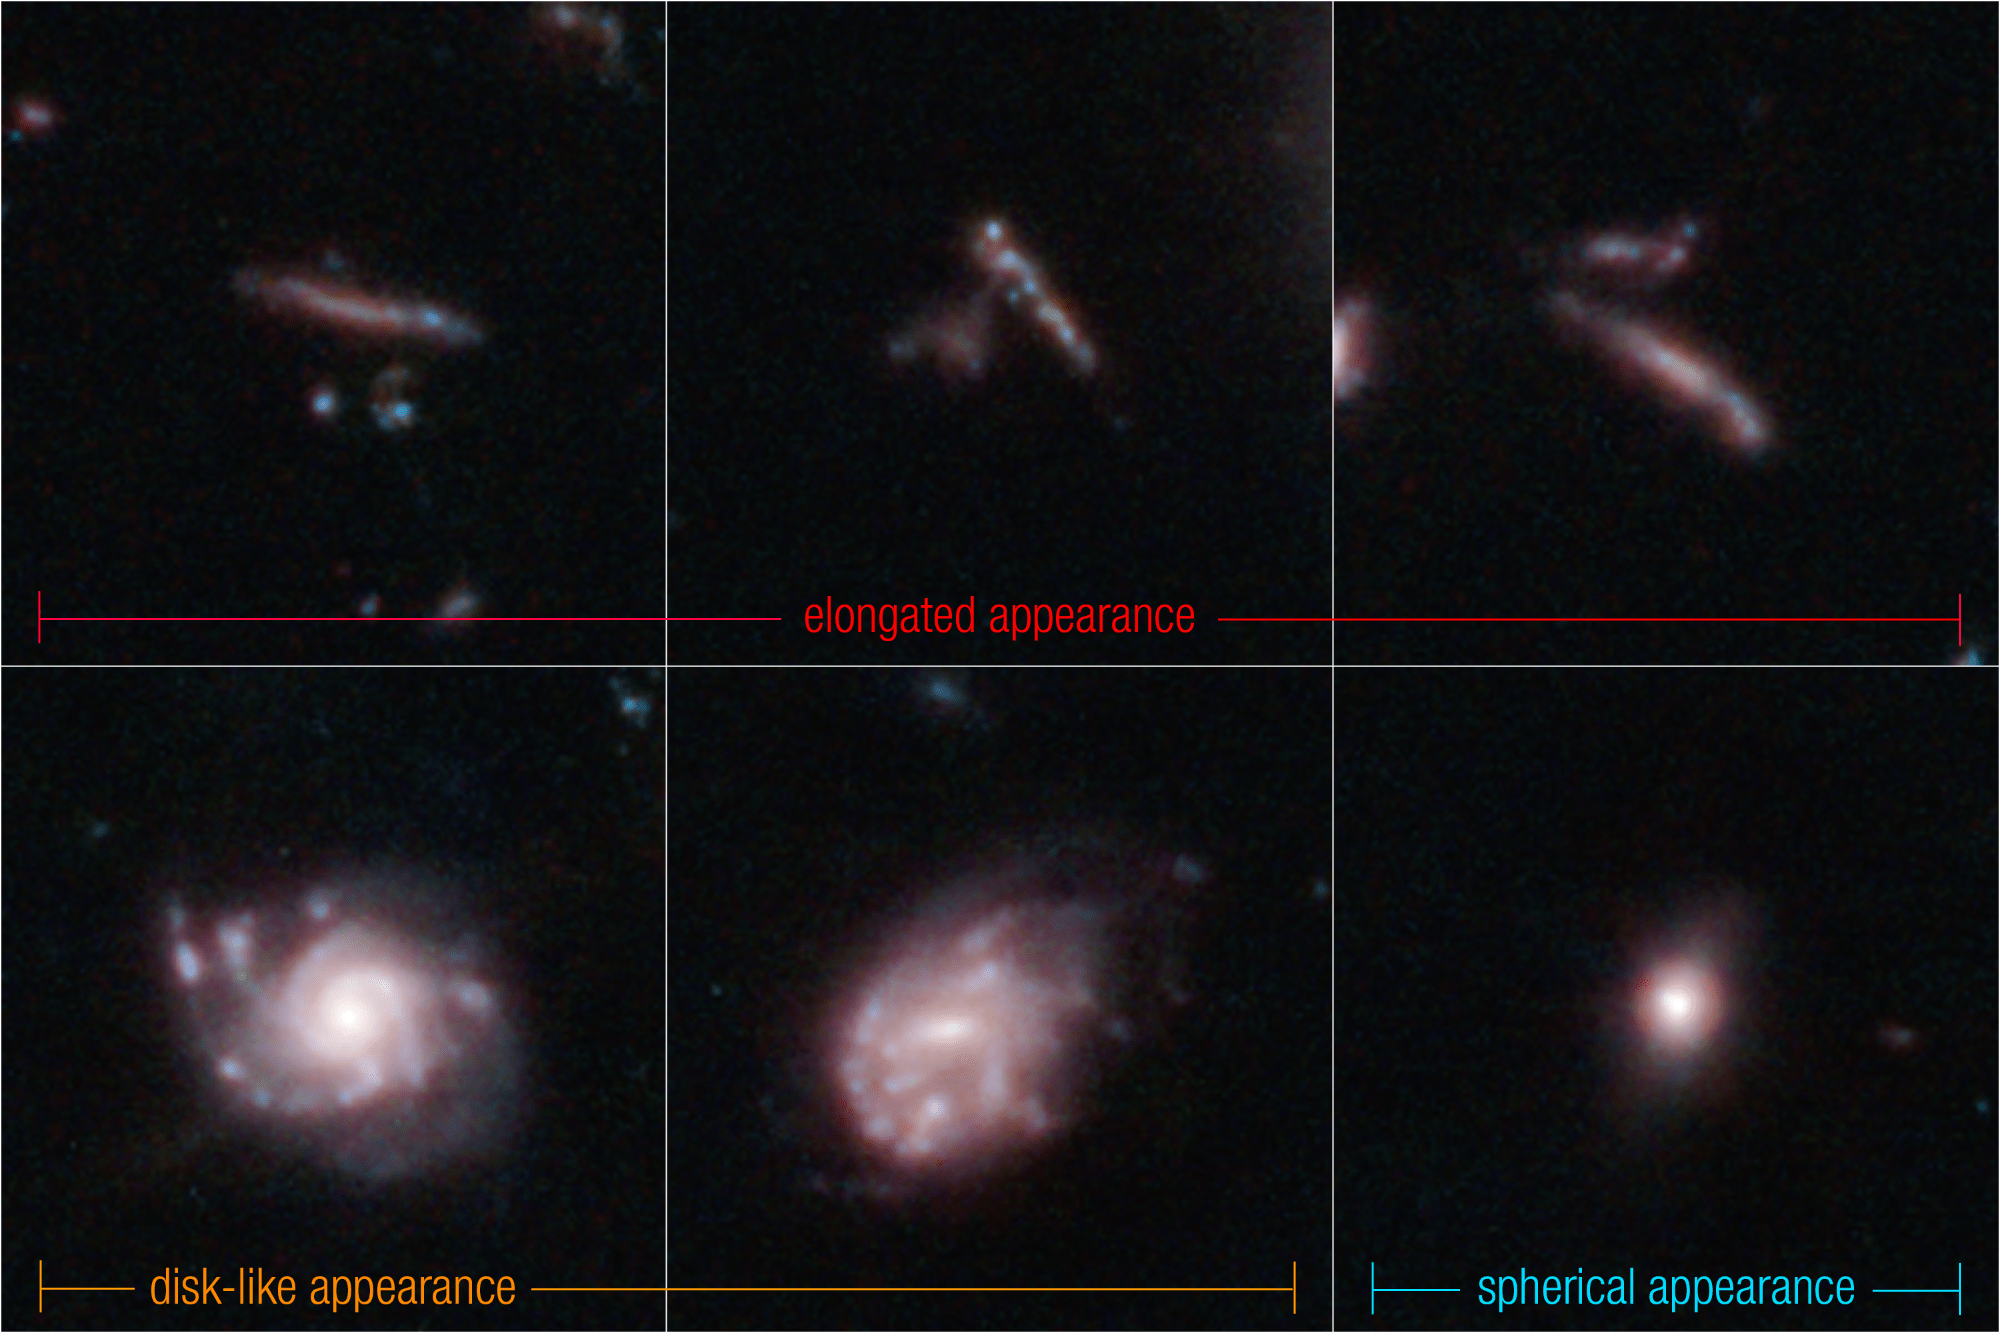 Six galaxies appear in boxes, three by two. From top left to bottom right: The three galaxies in the top row are labeled, elongated appearance. All three galaxies appear to form thin lines that take up less than a quarter of the frame. The galaxy at top left has a horizontal thin line with two dots beneath it; the center galaxy is a short line from top left to bottom right made up of individual dots, with a haze toward the center-left; the right galaxy is the longest line angles from top left to bottom right, and several dim dots above it. Along the lower row, the galaxies at left and center, labeled disk-like appearances, have hazy spiral shapes, and each take up about half of the frame. The galaxy at lower right, labeled spherical appearance, looks like a bright dot centered in the frame and is far smaller.